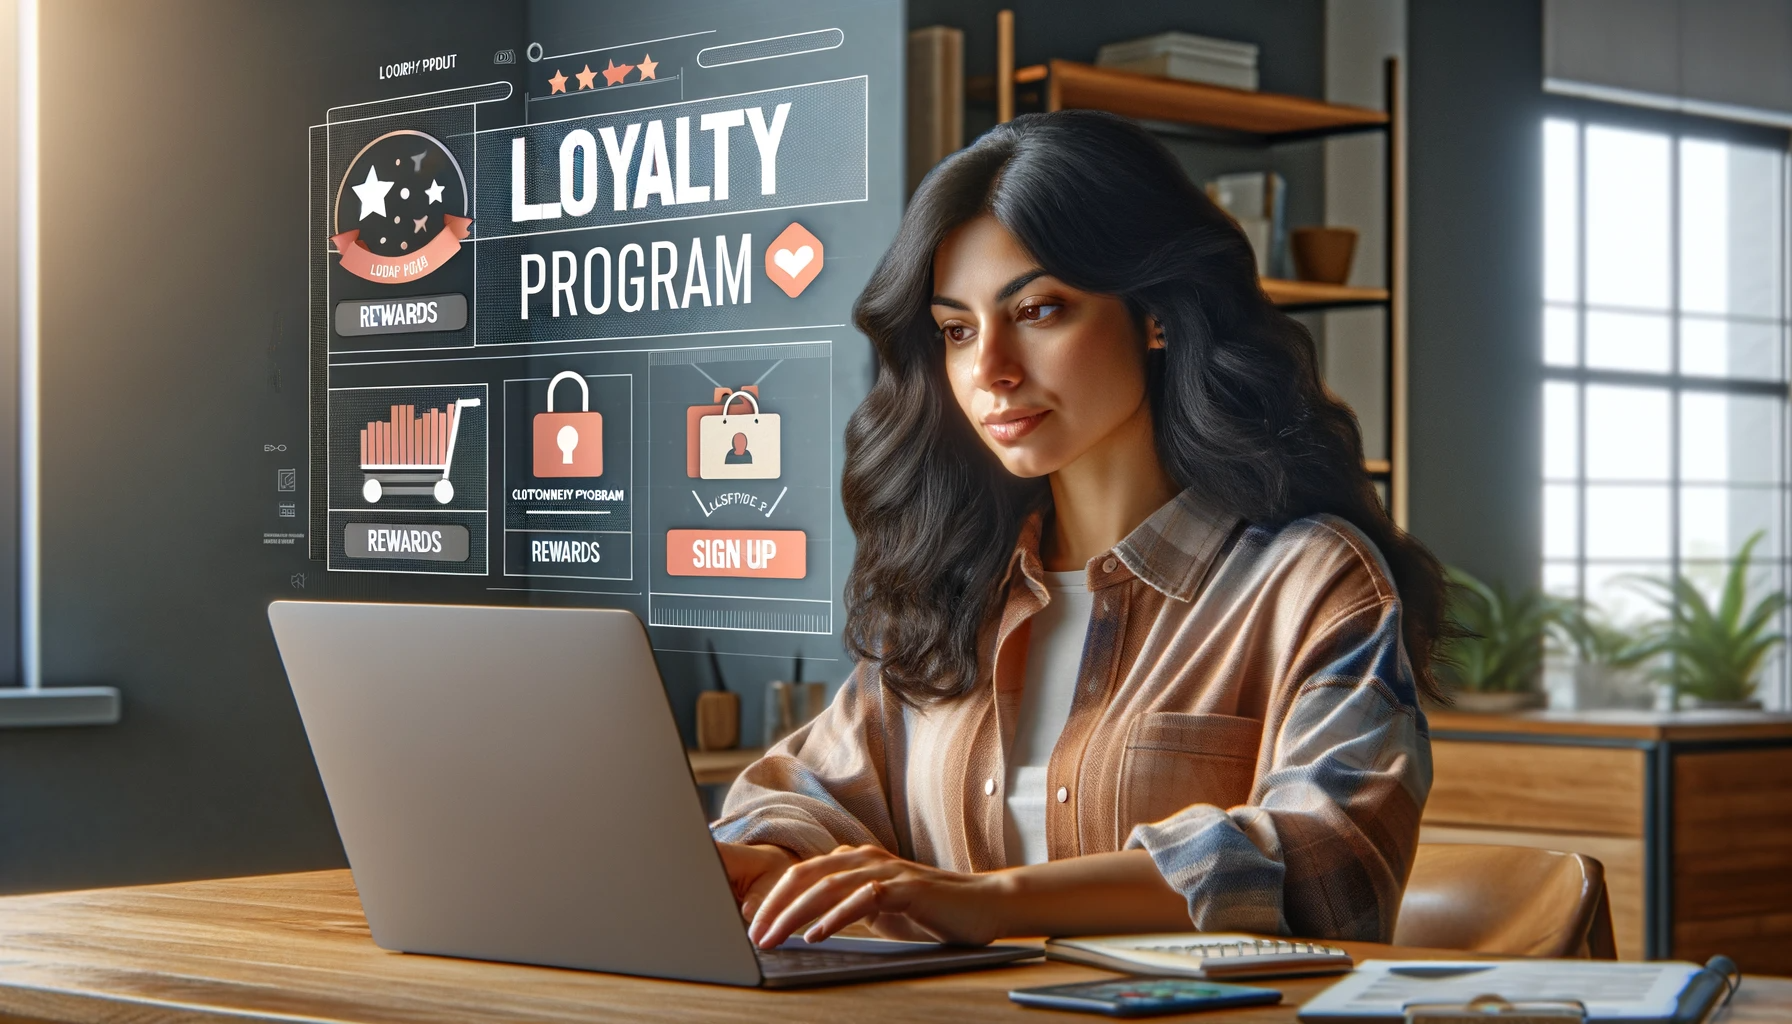 DALL·E 2023-11-22 01.57.15 - A highly realistic 16_9 image depicting a Hispanic woman at her desk, focused on her laptop screen, engaging with a customer LOYALTY program. The woma